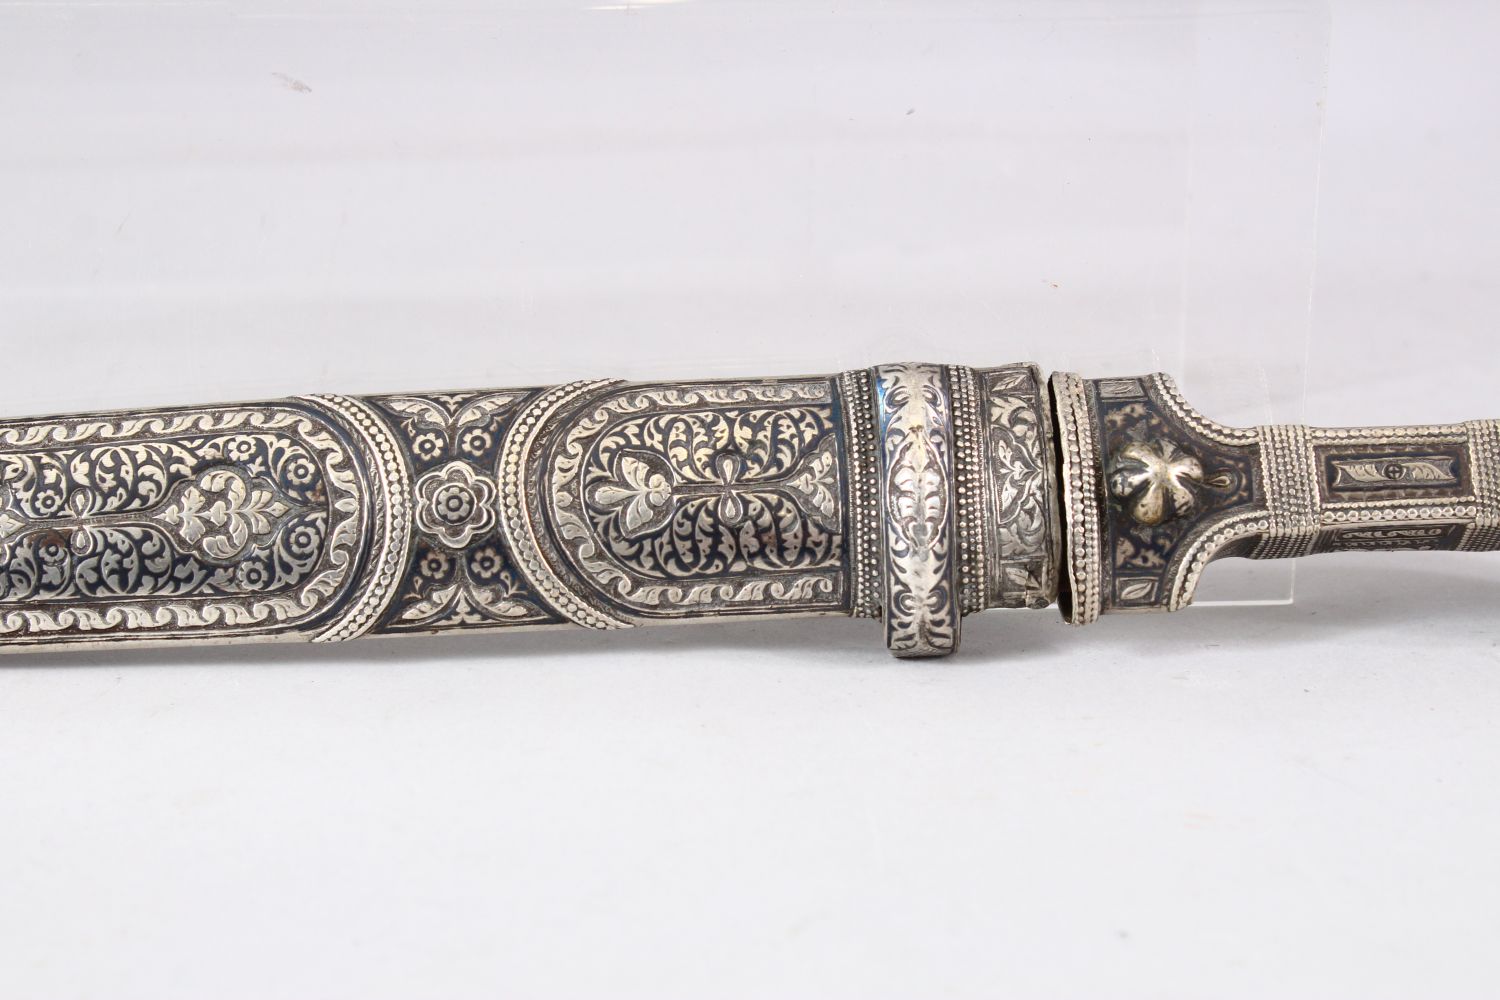 A 19TH CENTURY KINDJAL DAGGER and scabbard, 47.5cm long. - Image 4 of 8